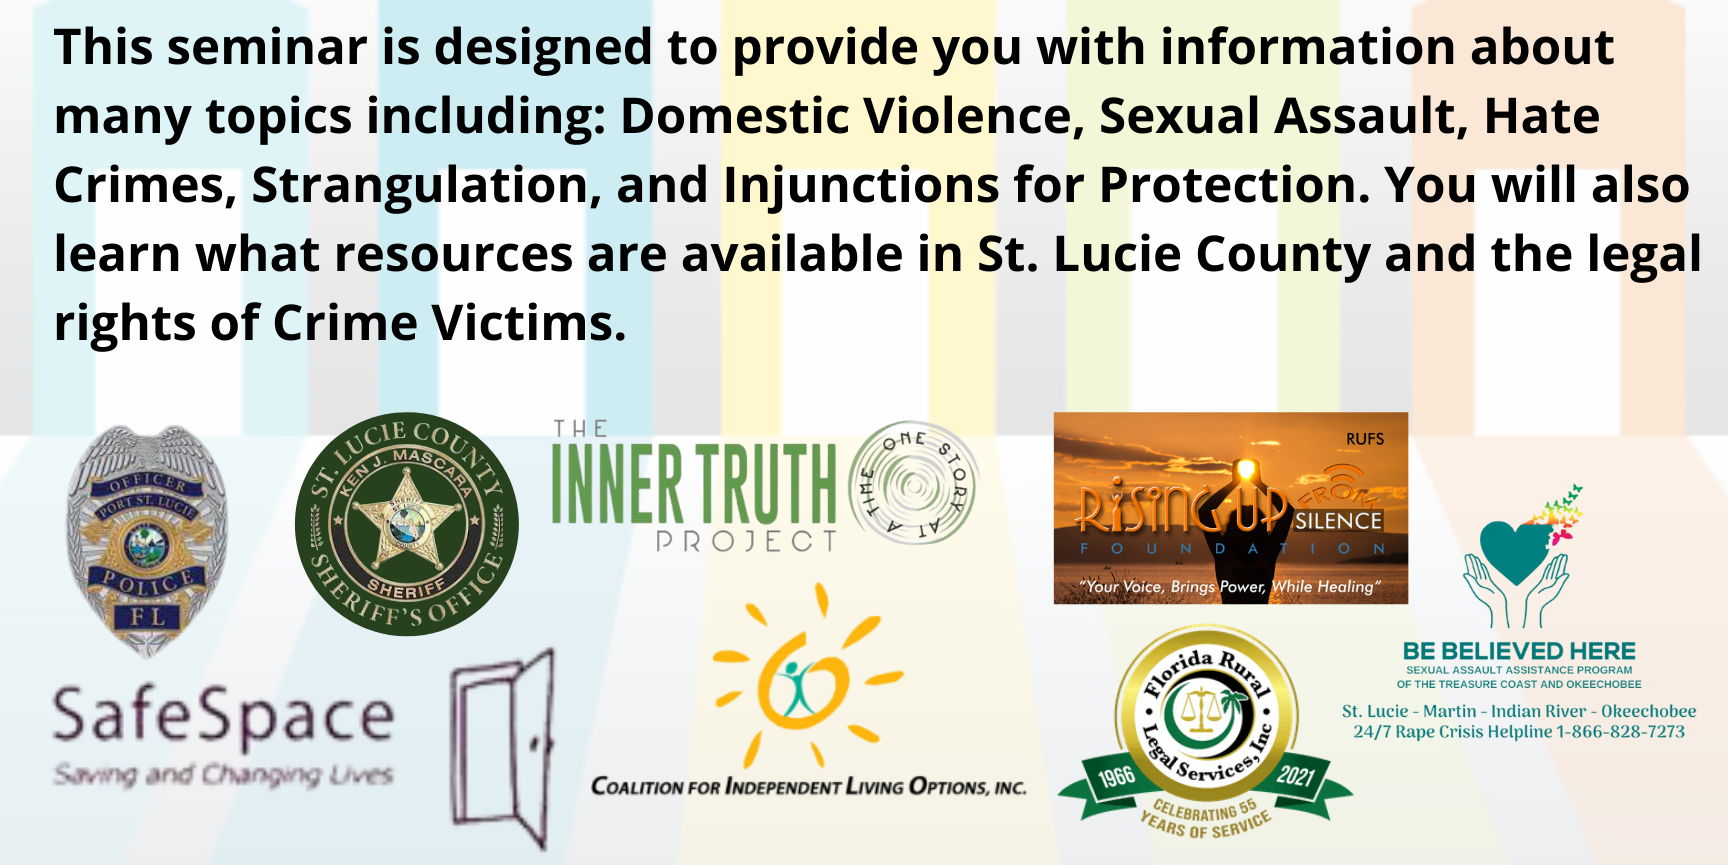 St. Lucie County Resource Seminar promotional image